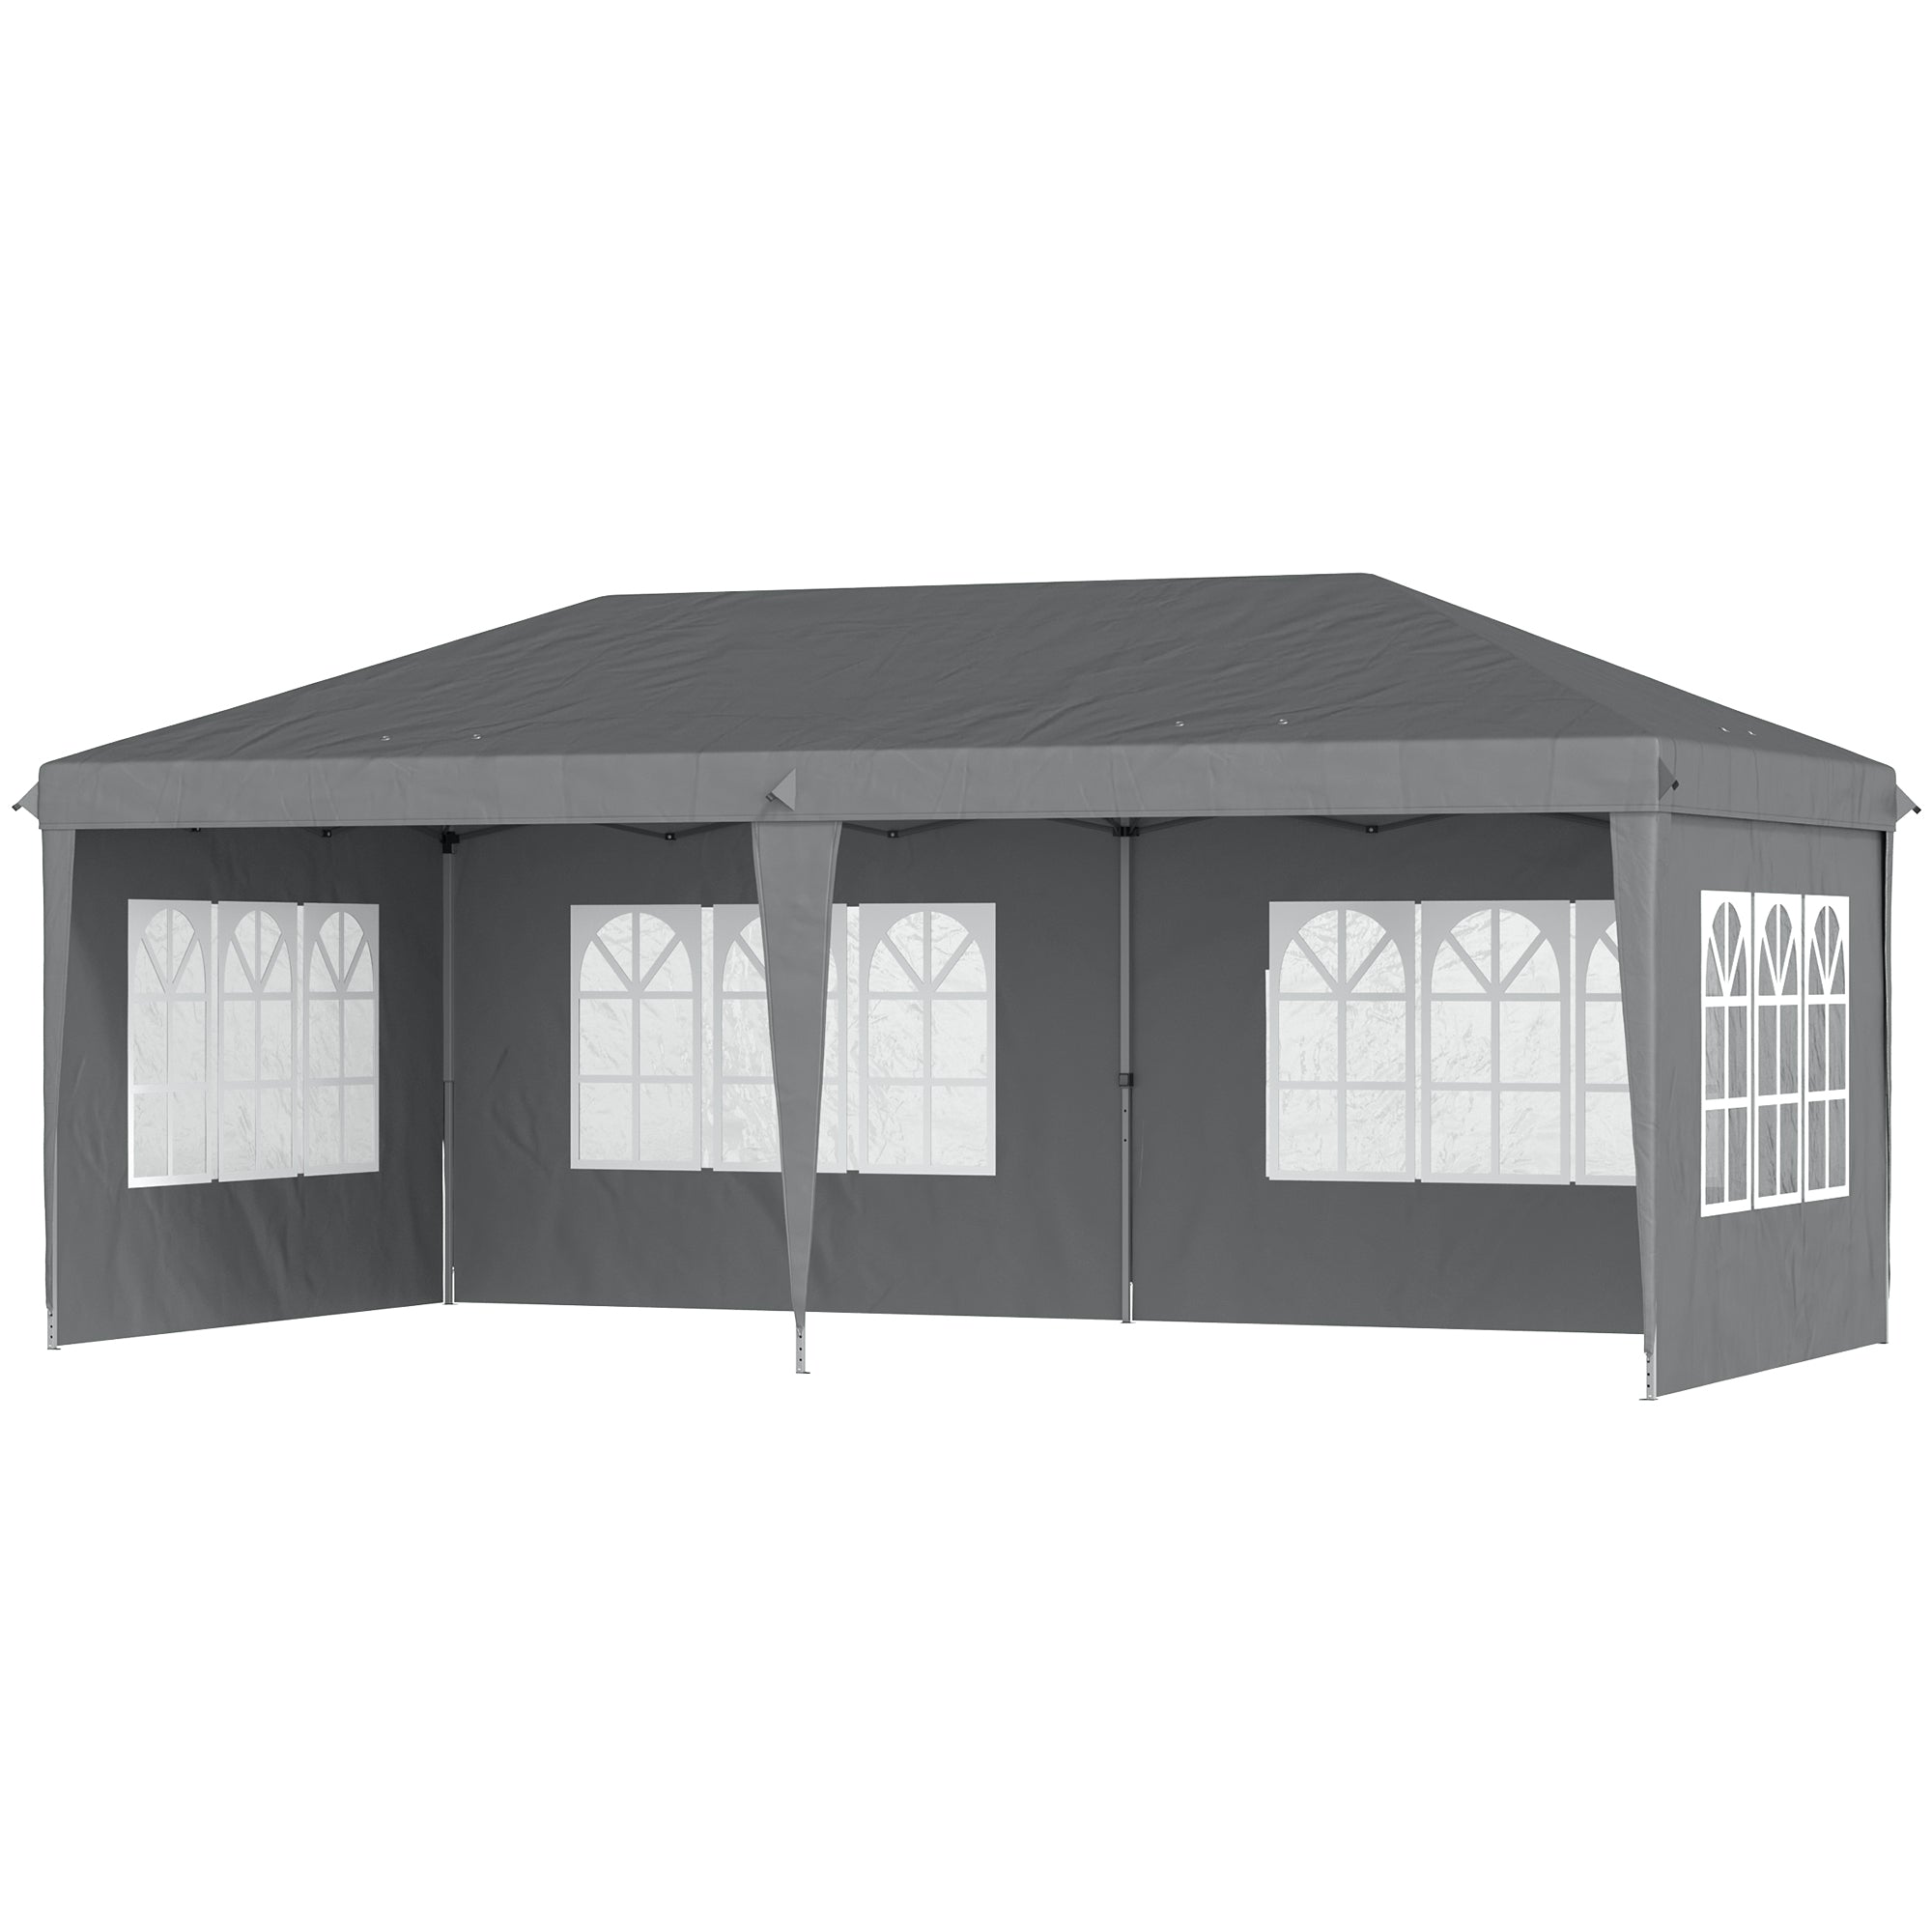 3 x 6m Pop Up Gazebo, Height Adjustable Marquee Party Tent with Sidewalls and Storage Bag, Grey-0